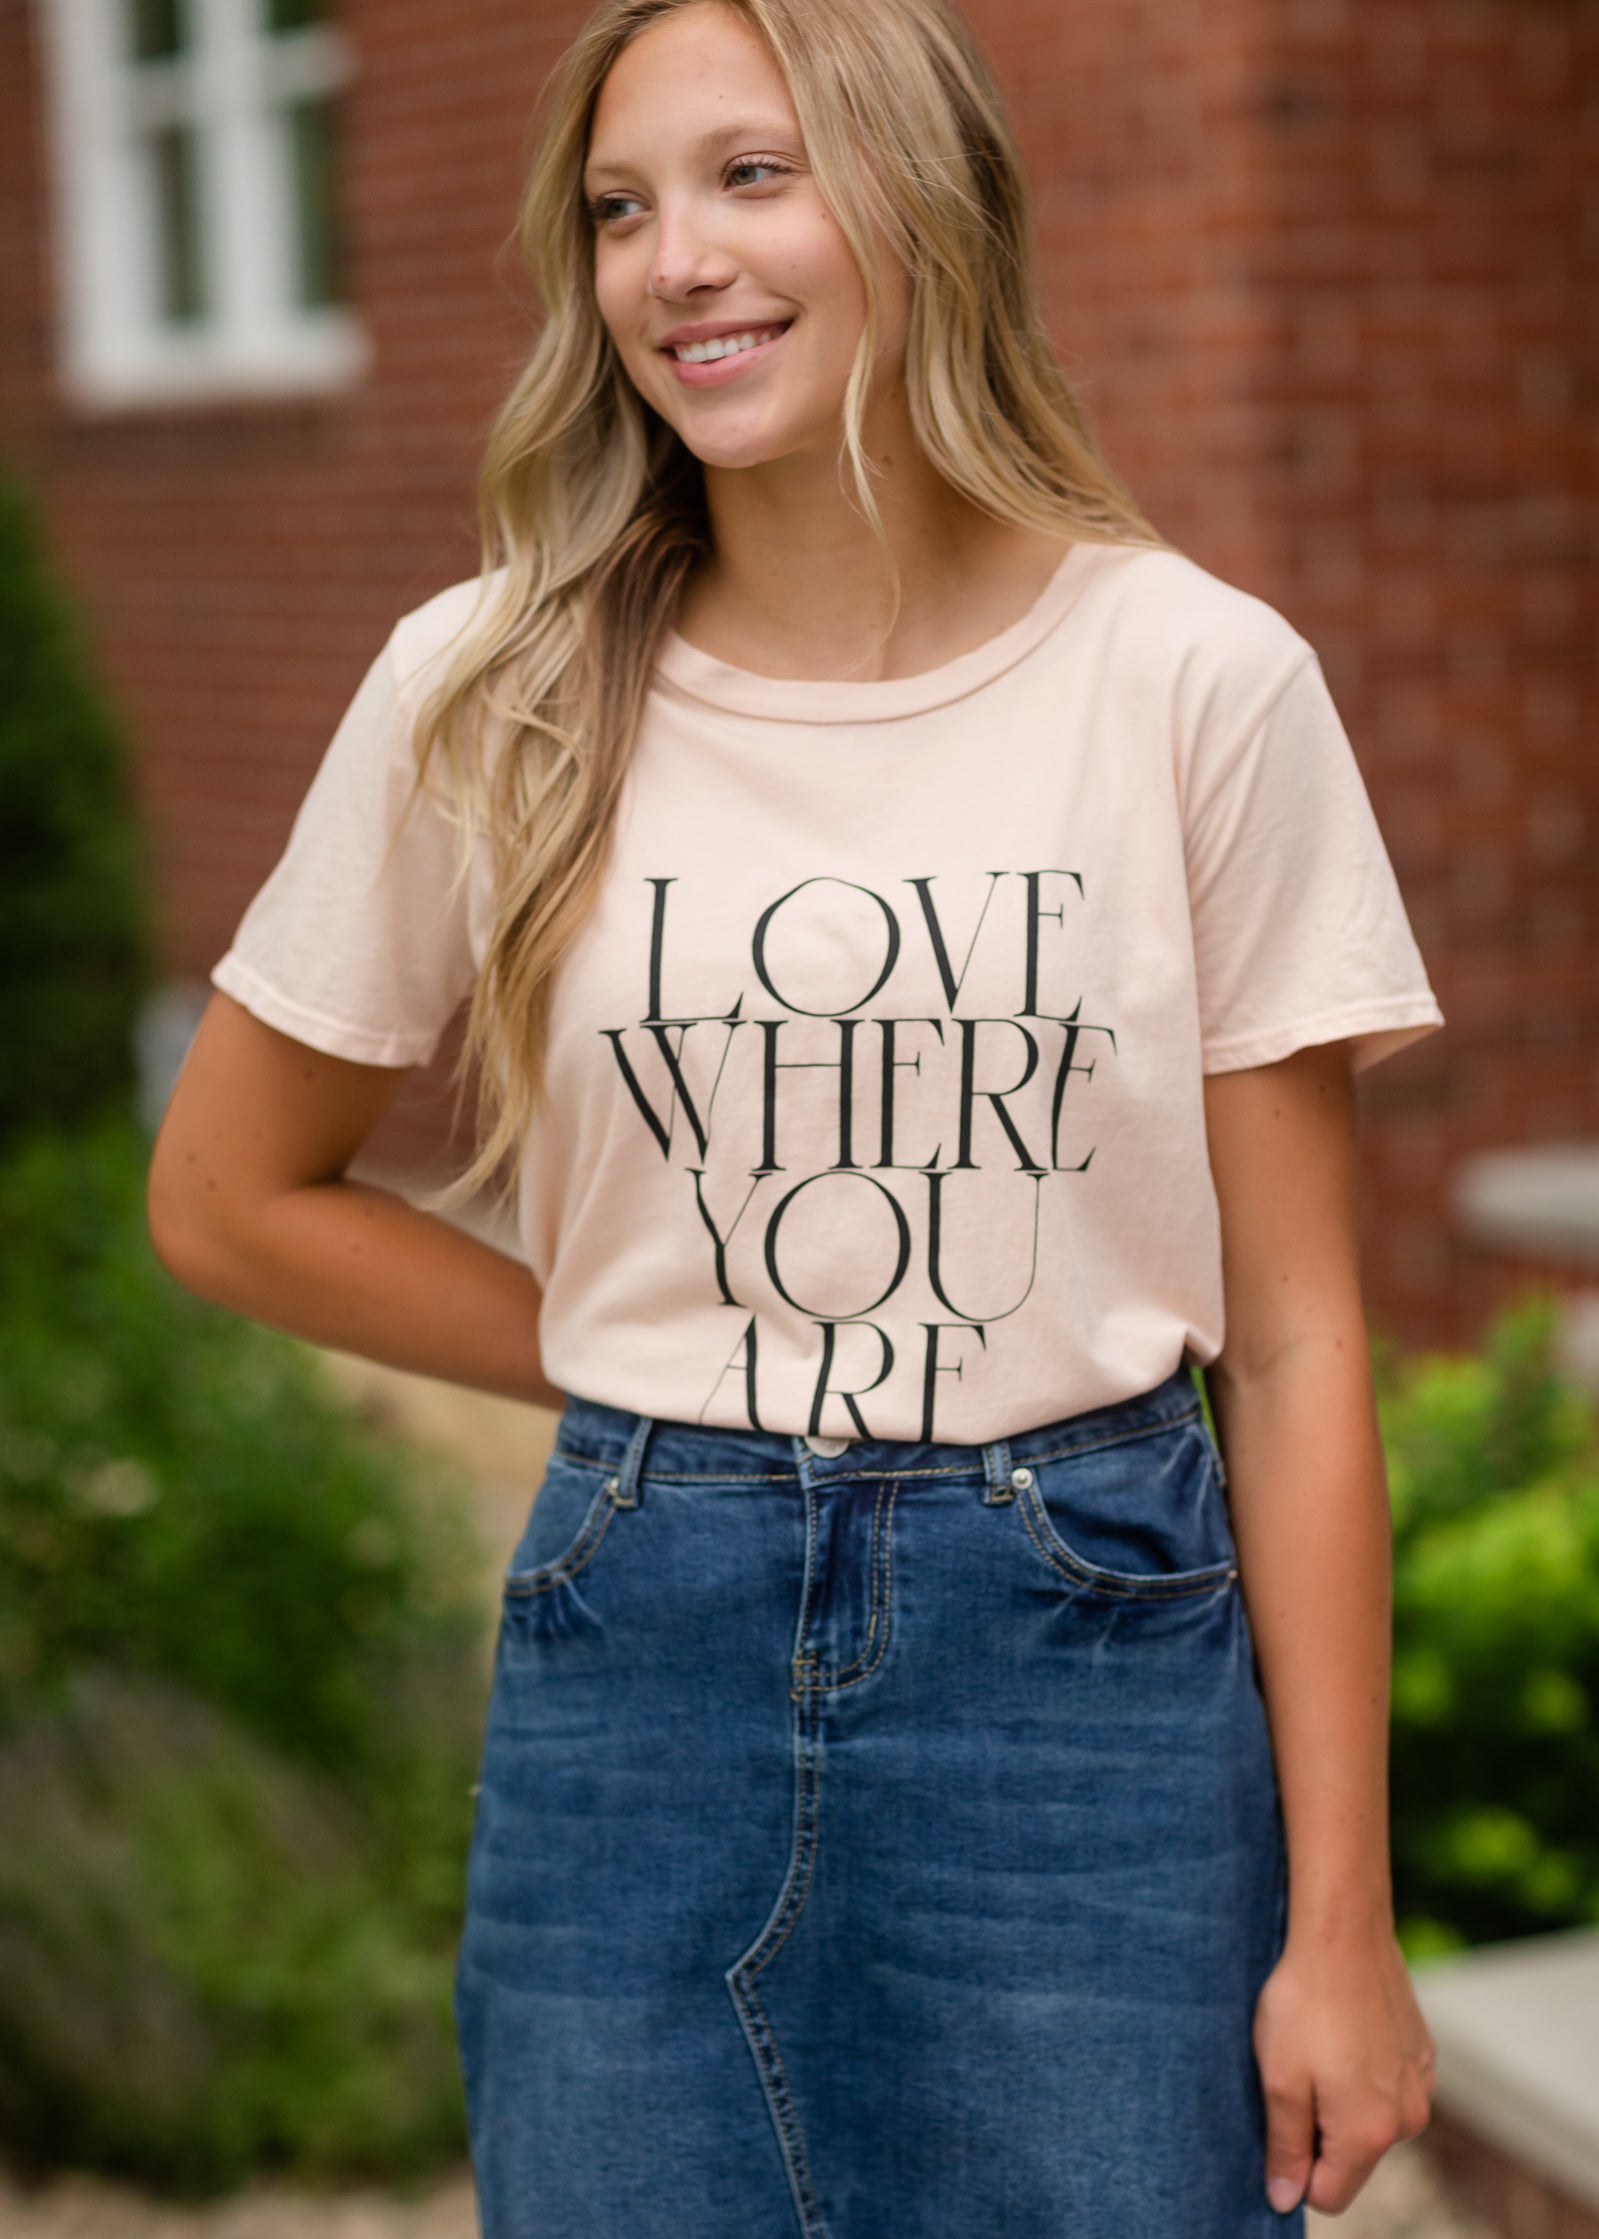 Blush Love Where You Are Graphic Tee - FINAL SALE Tops